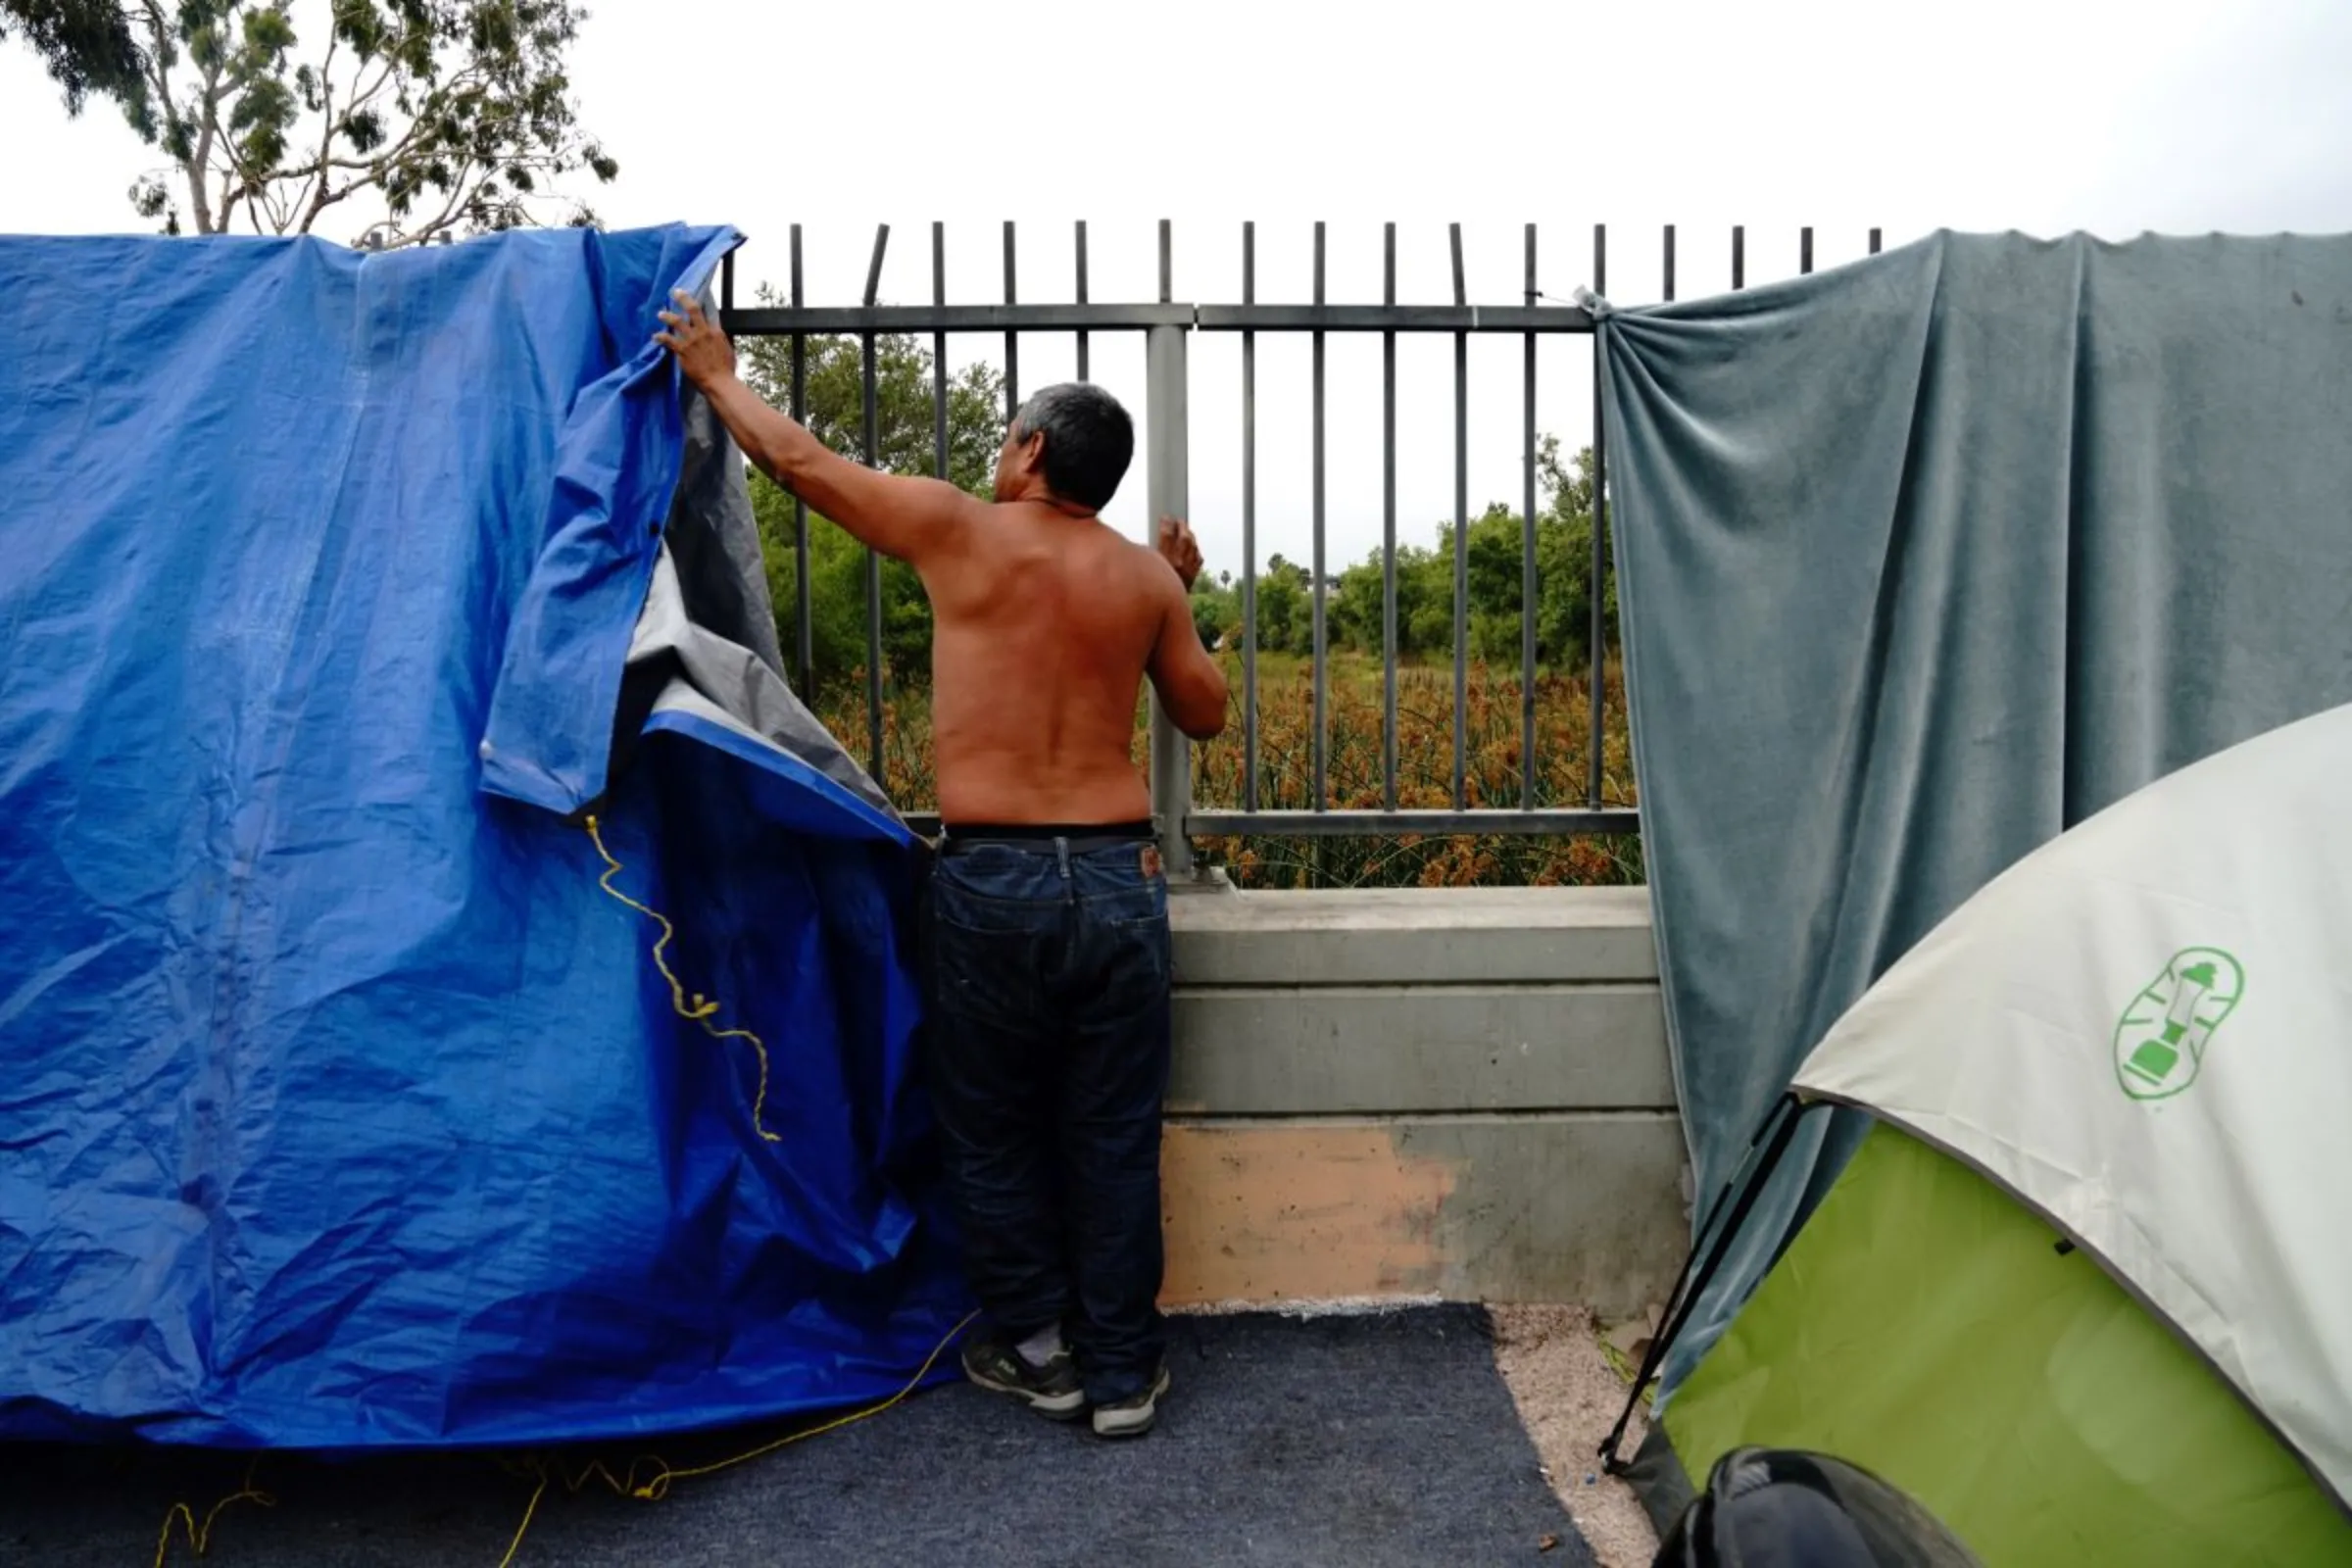 An unhoused man removes tarps and blankets from a fence at a homeless encampment, before the encampment's clearing by Los Angeles police and sanitation workers in Harbor City, Los Angeles, California, U.S., July 1, 2021. REUTERS/Bing Guan